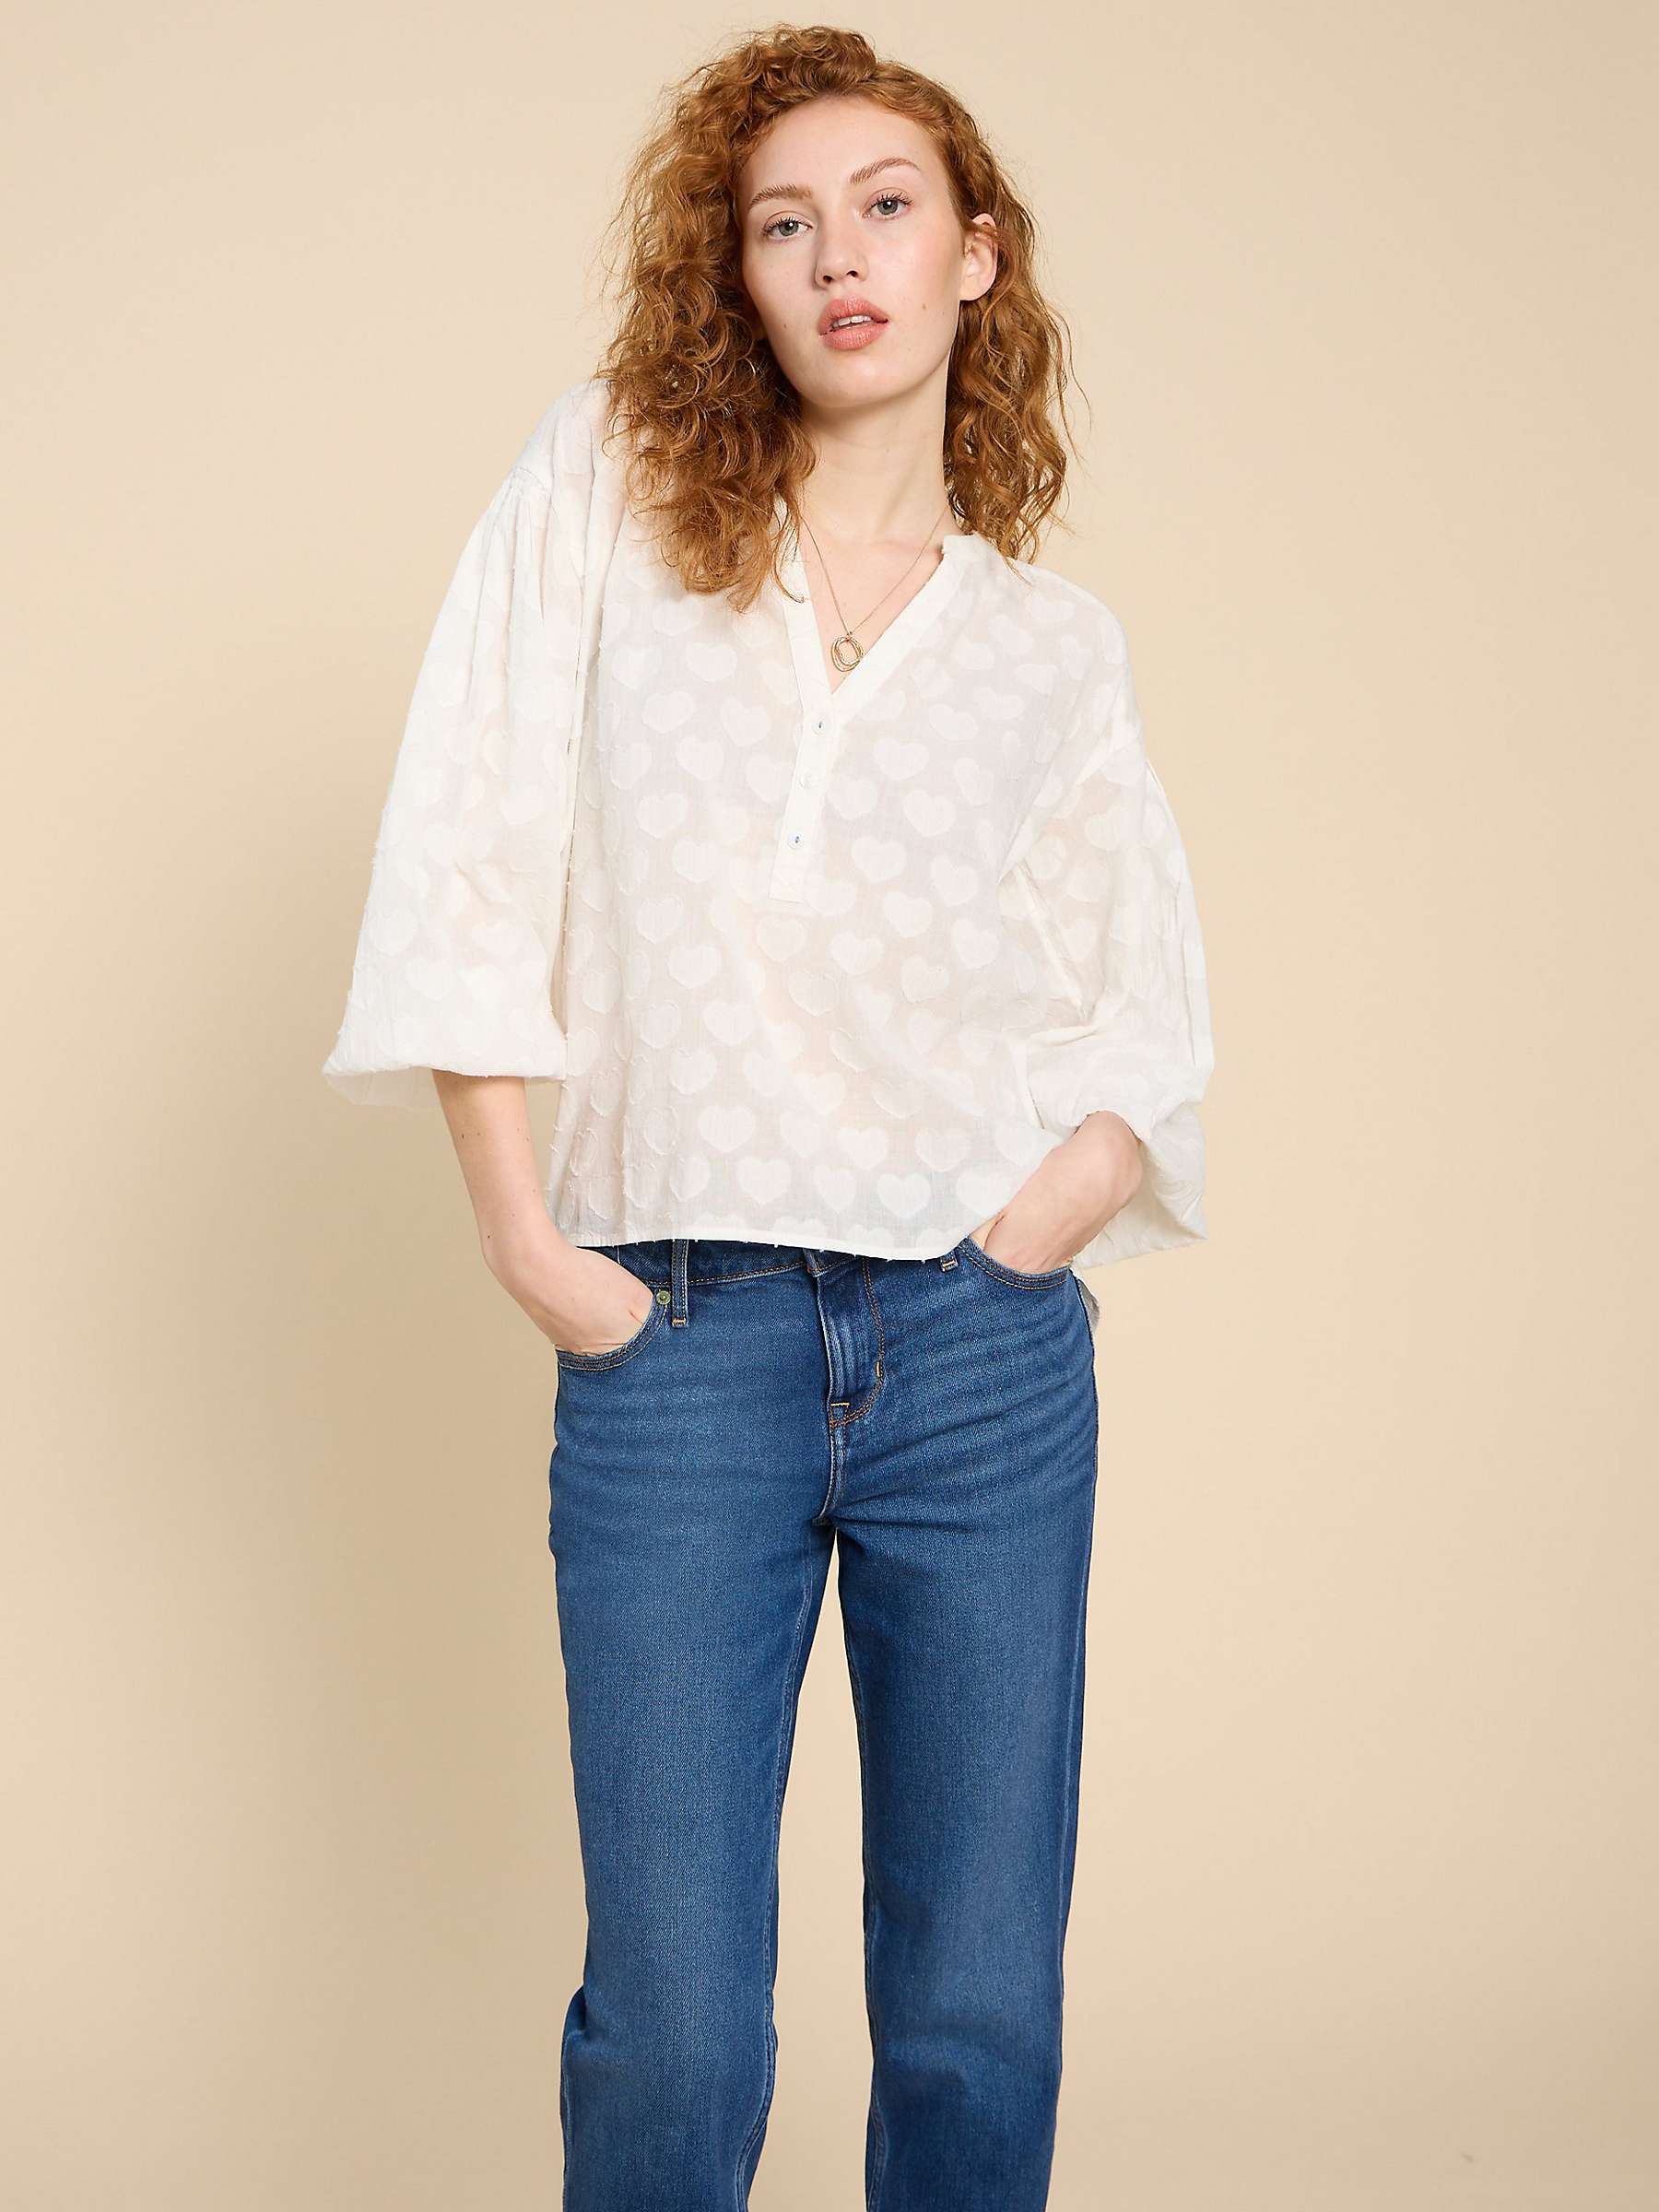 Buy White Stuff Heart Jacquard Top, Pale Ivory Online at johnlewis.com